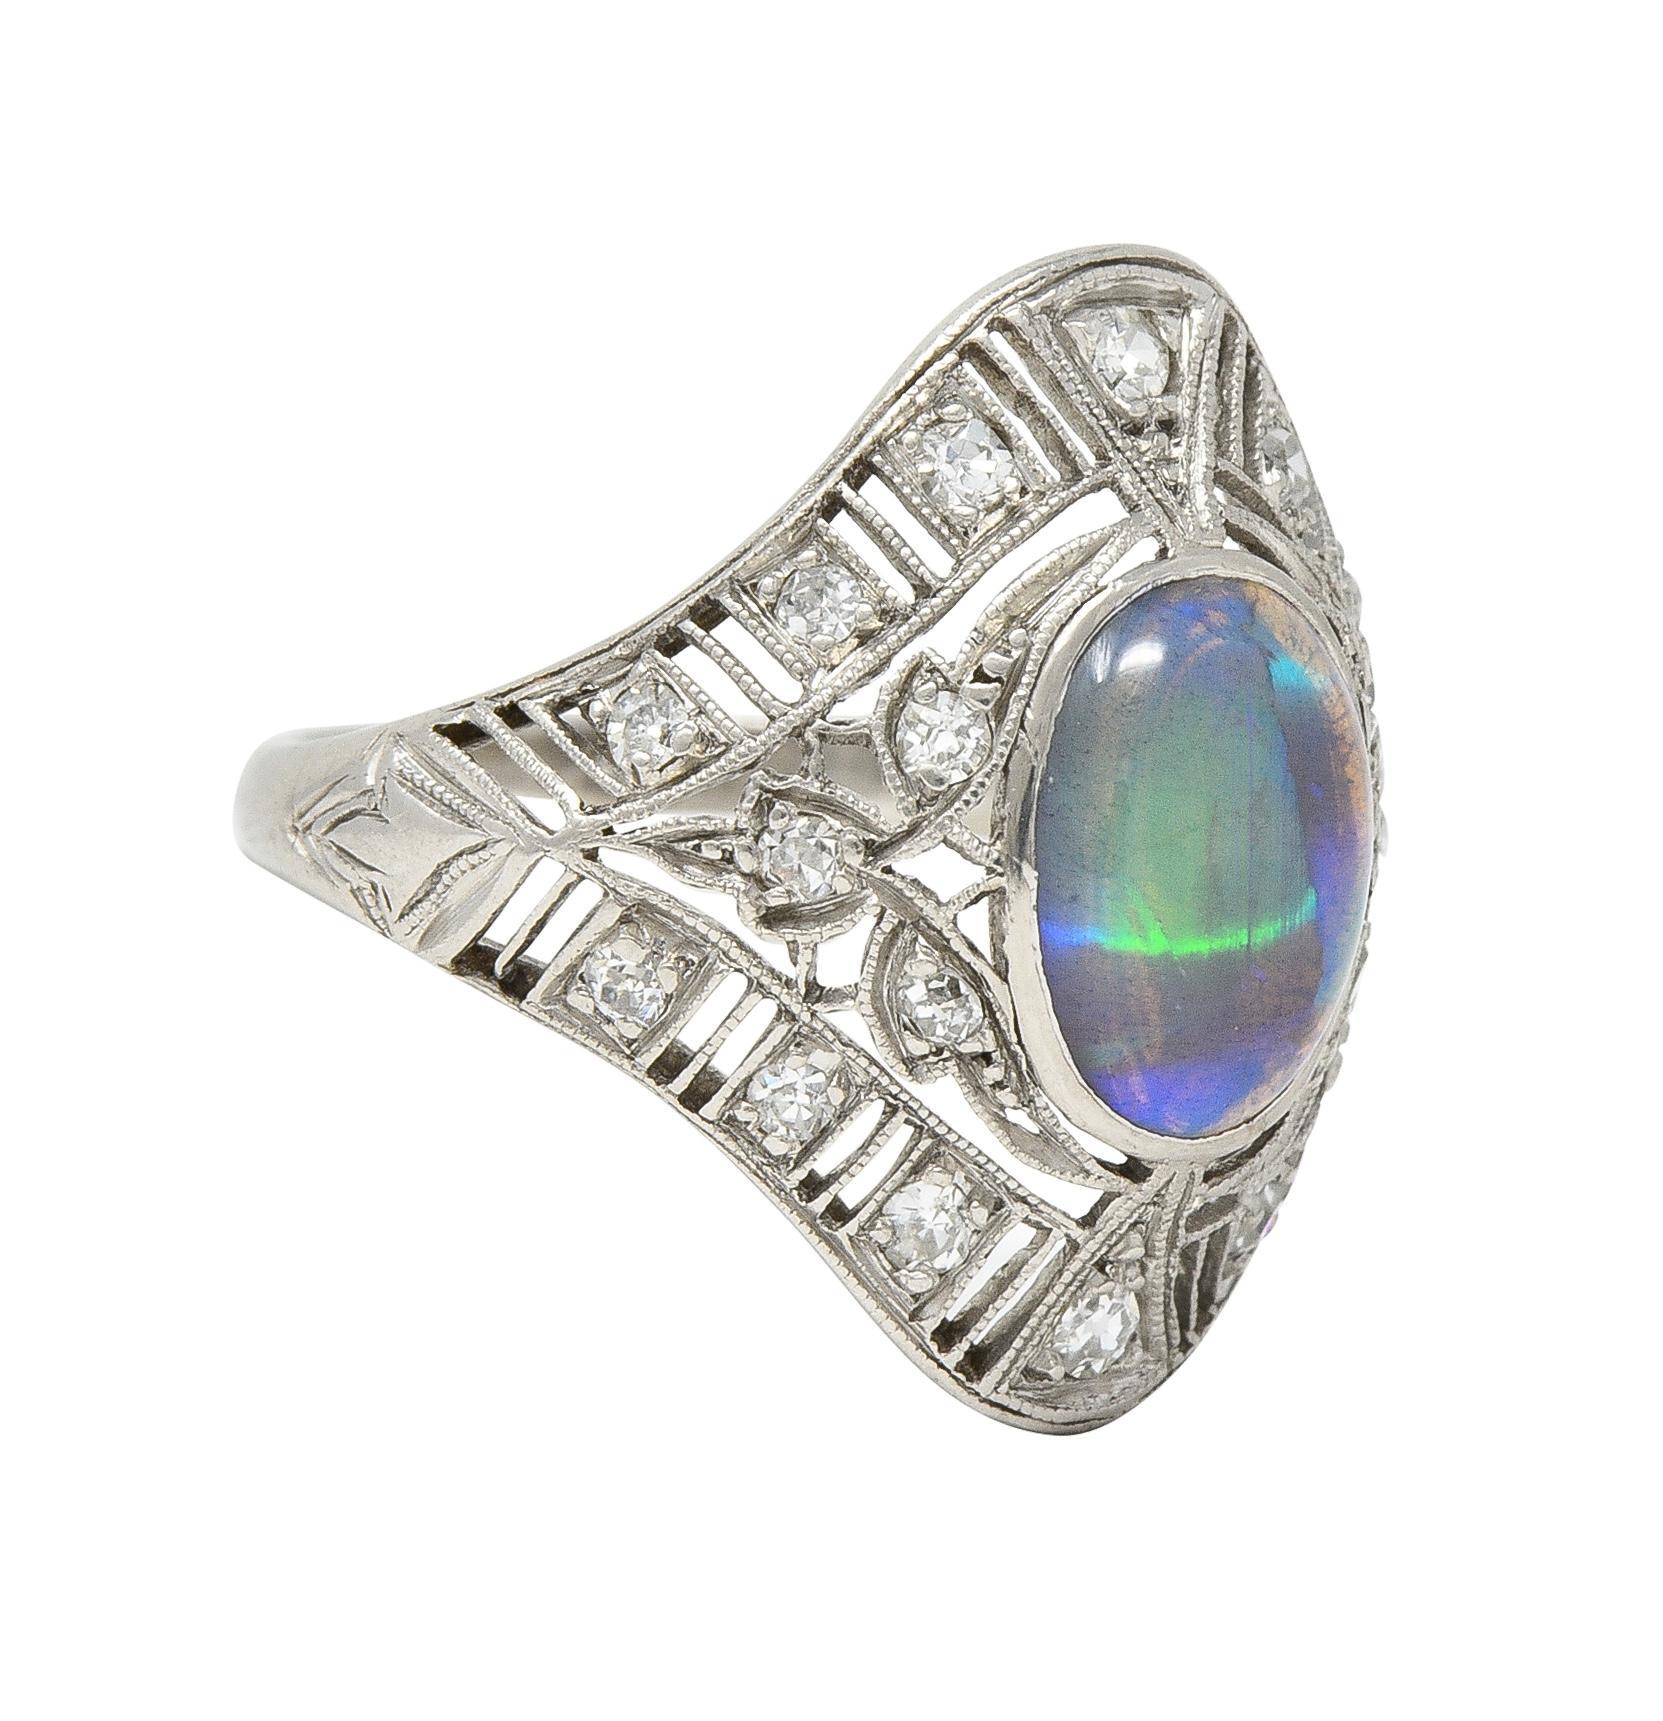 Centering a bezel set oval-shaped jelly opal cabochon measuring 7.0 x 9.0 mm 
Transparent black body color with strong blue, green, and violet flashing 
Featuring a navette-shaped and pierced lotus motif filigree surround 
Bead set with single cut